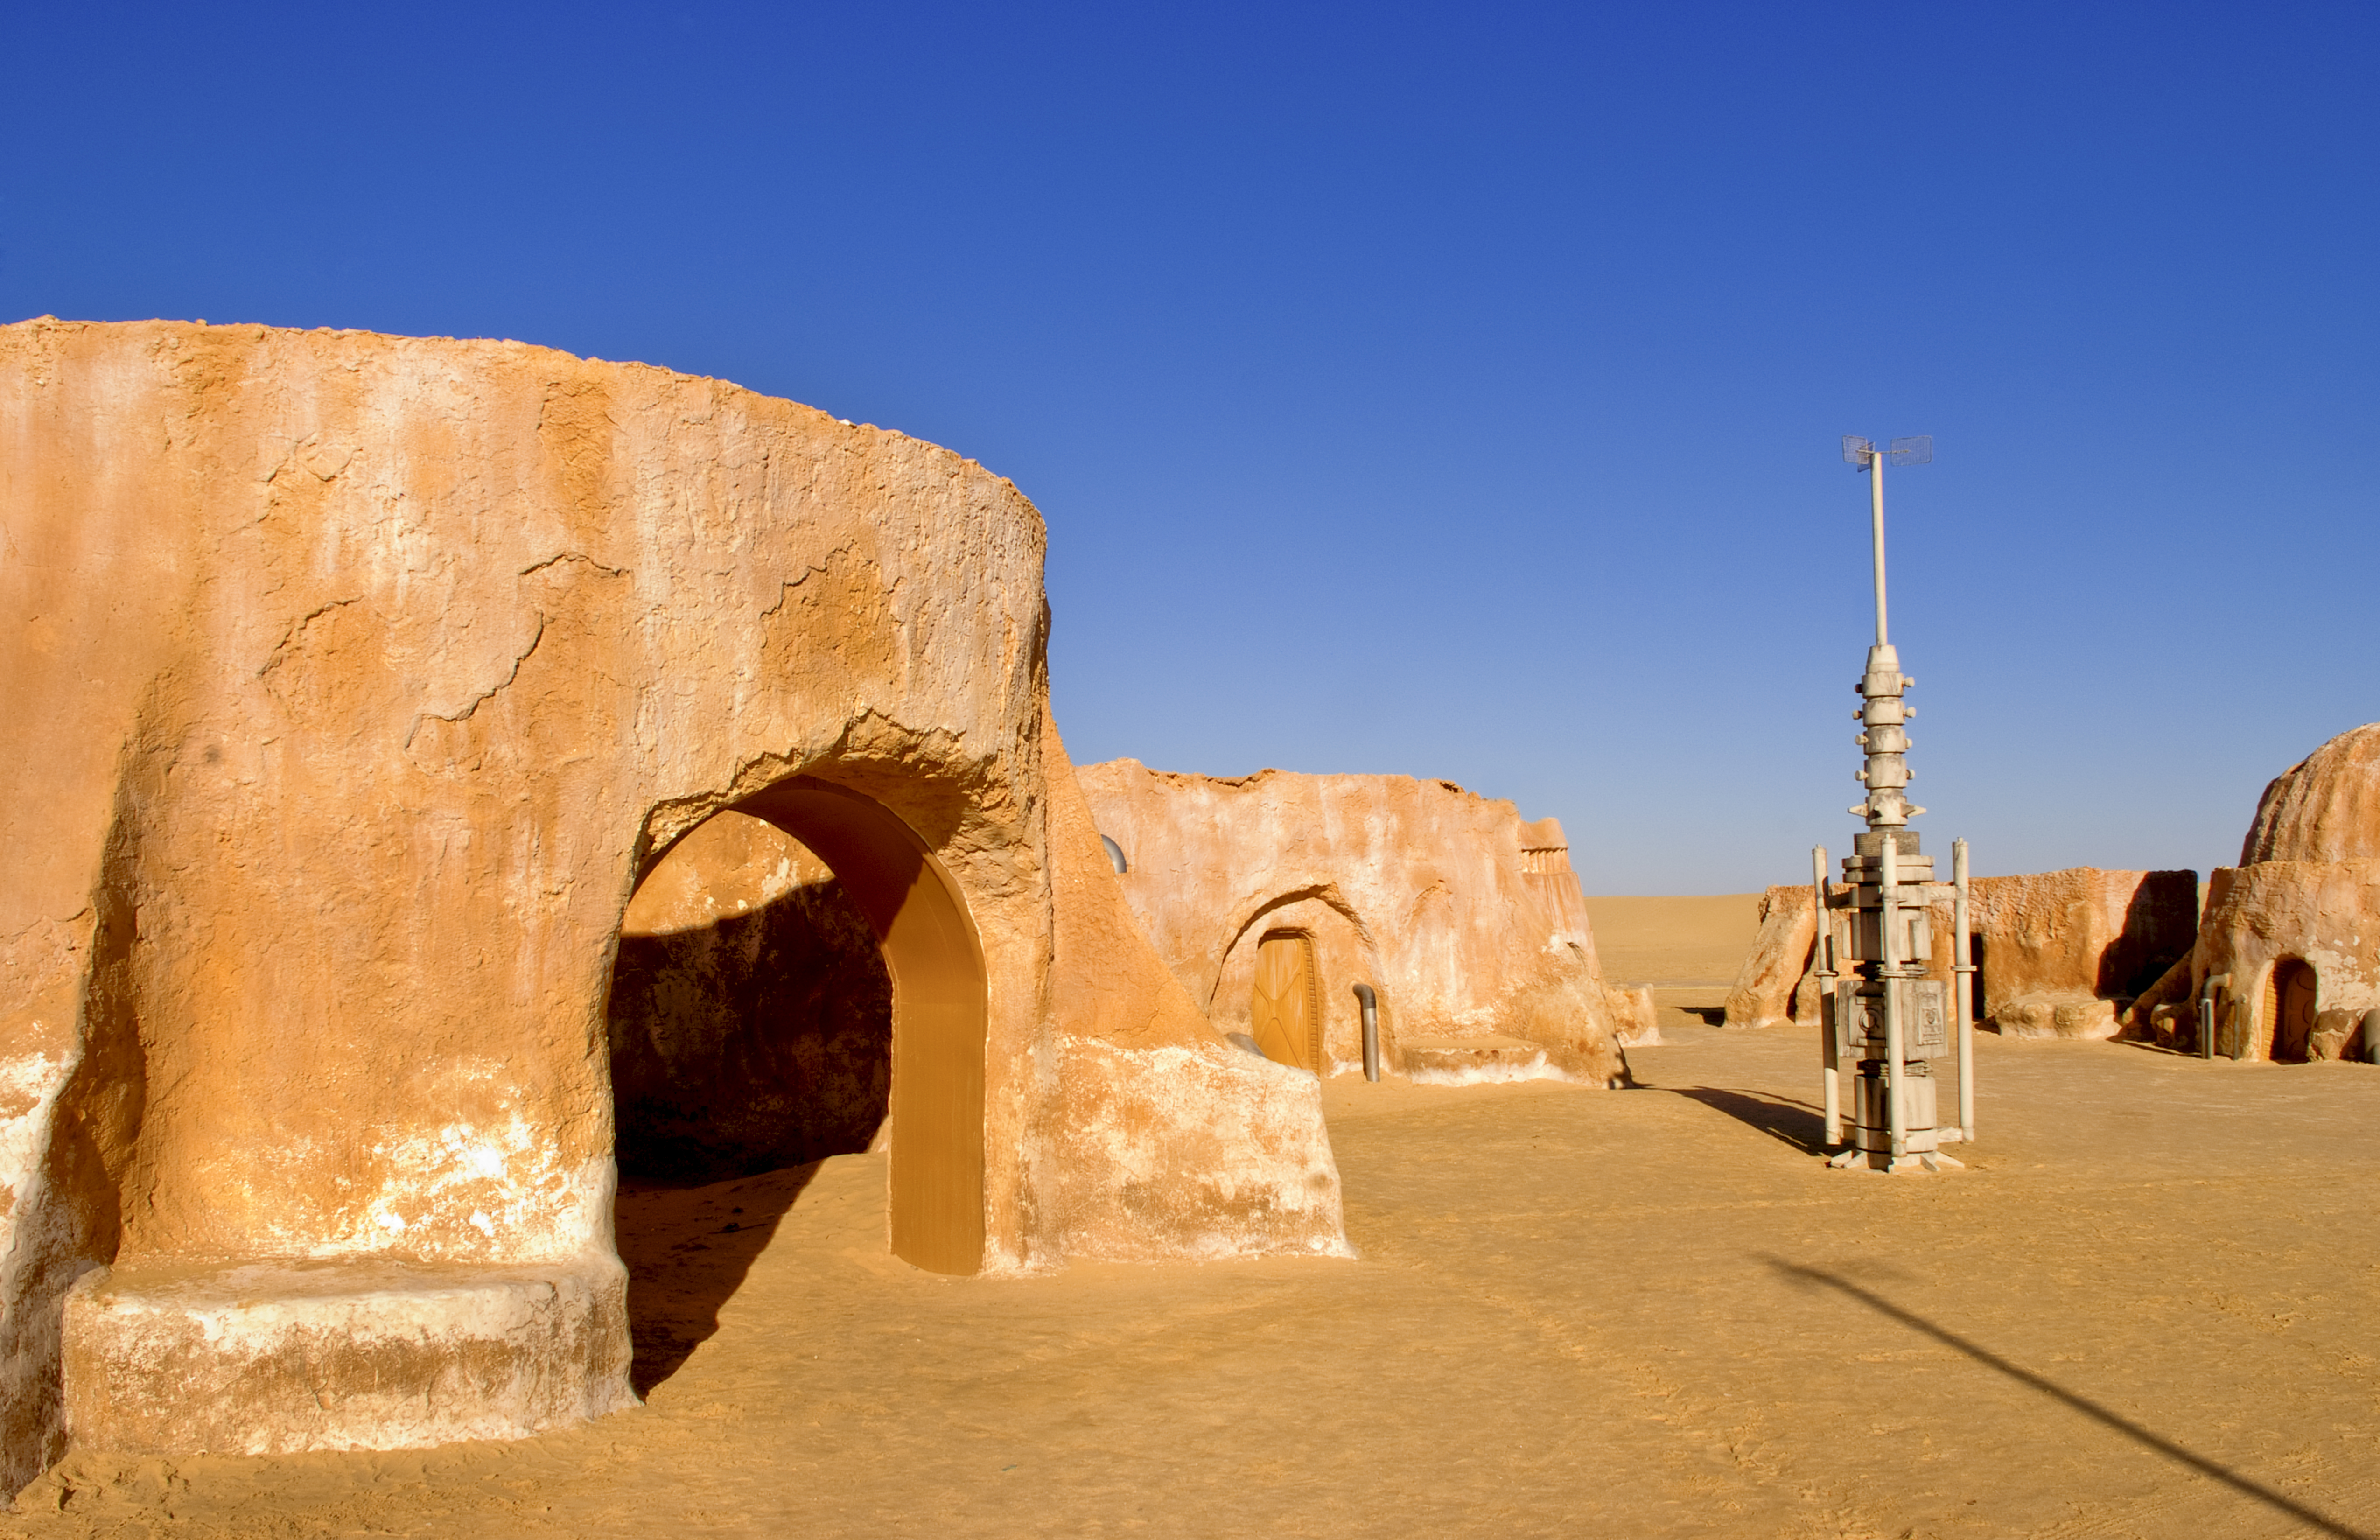 The Star Wars: Phantom Menace set was left standing as a tourist attraction